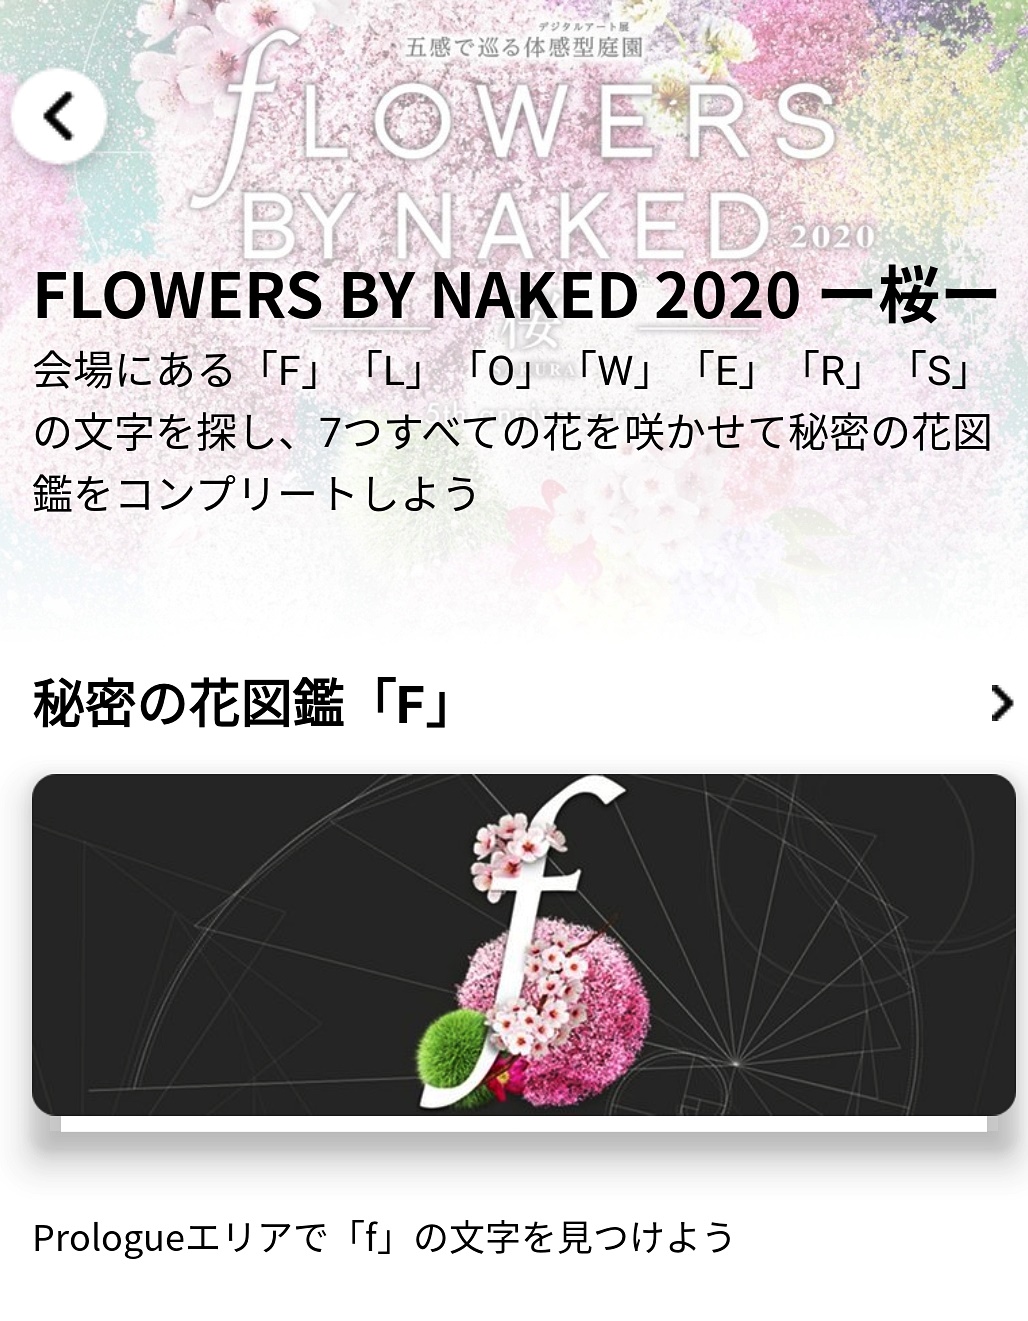 「FLOWERS BY NAKED 2020 －桜－」の限定ARコンテンツ